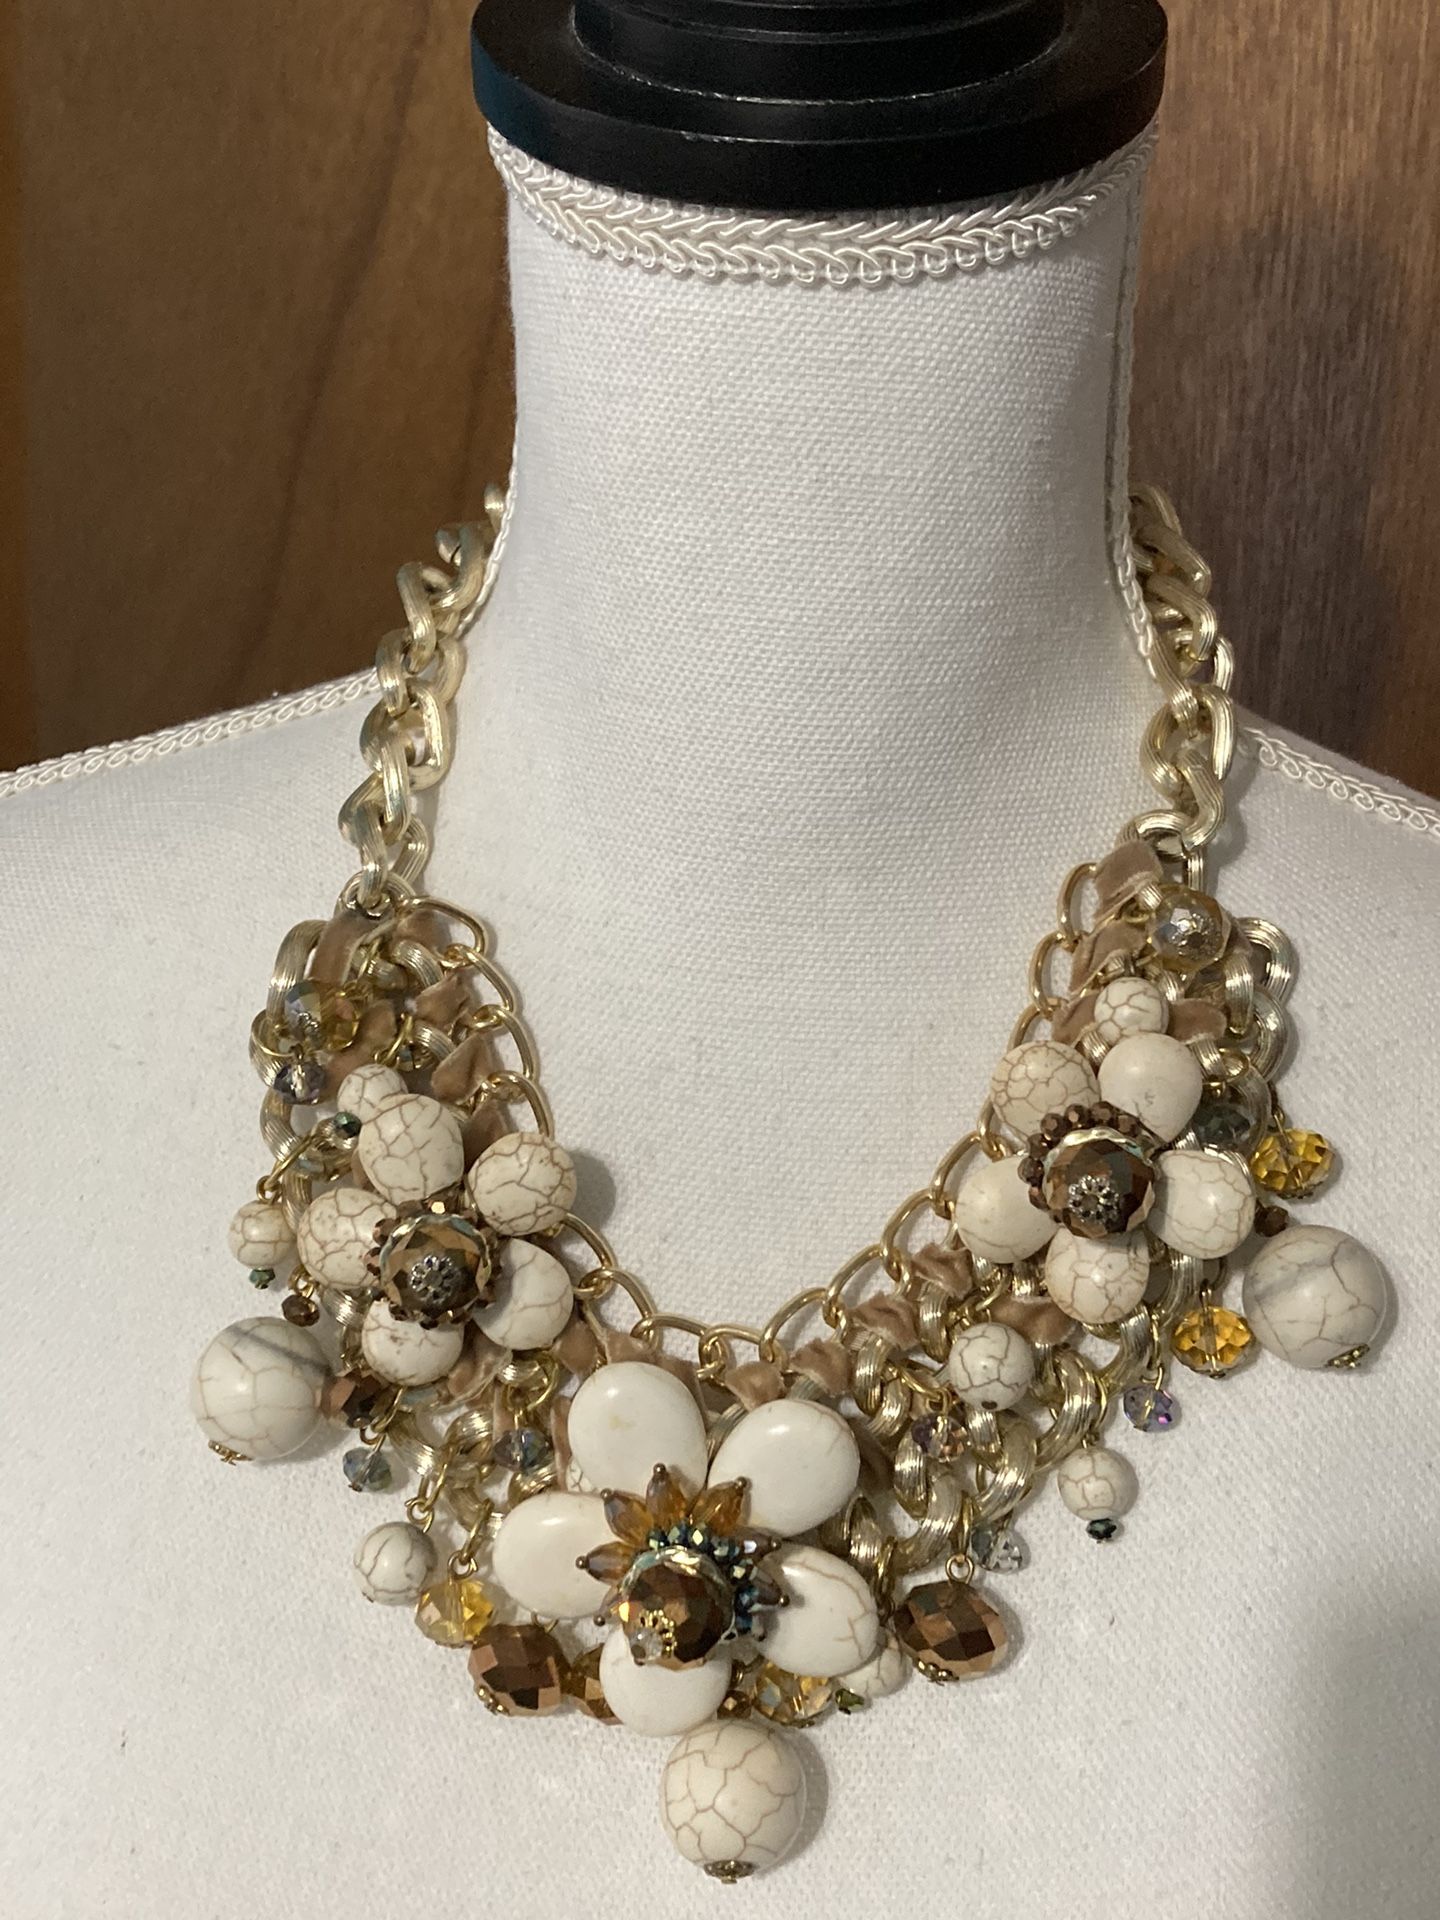 CHUNKY Gold Chain Flower Women's Necklace Woven With Glass Beads